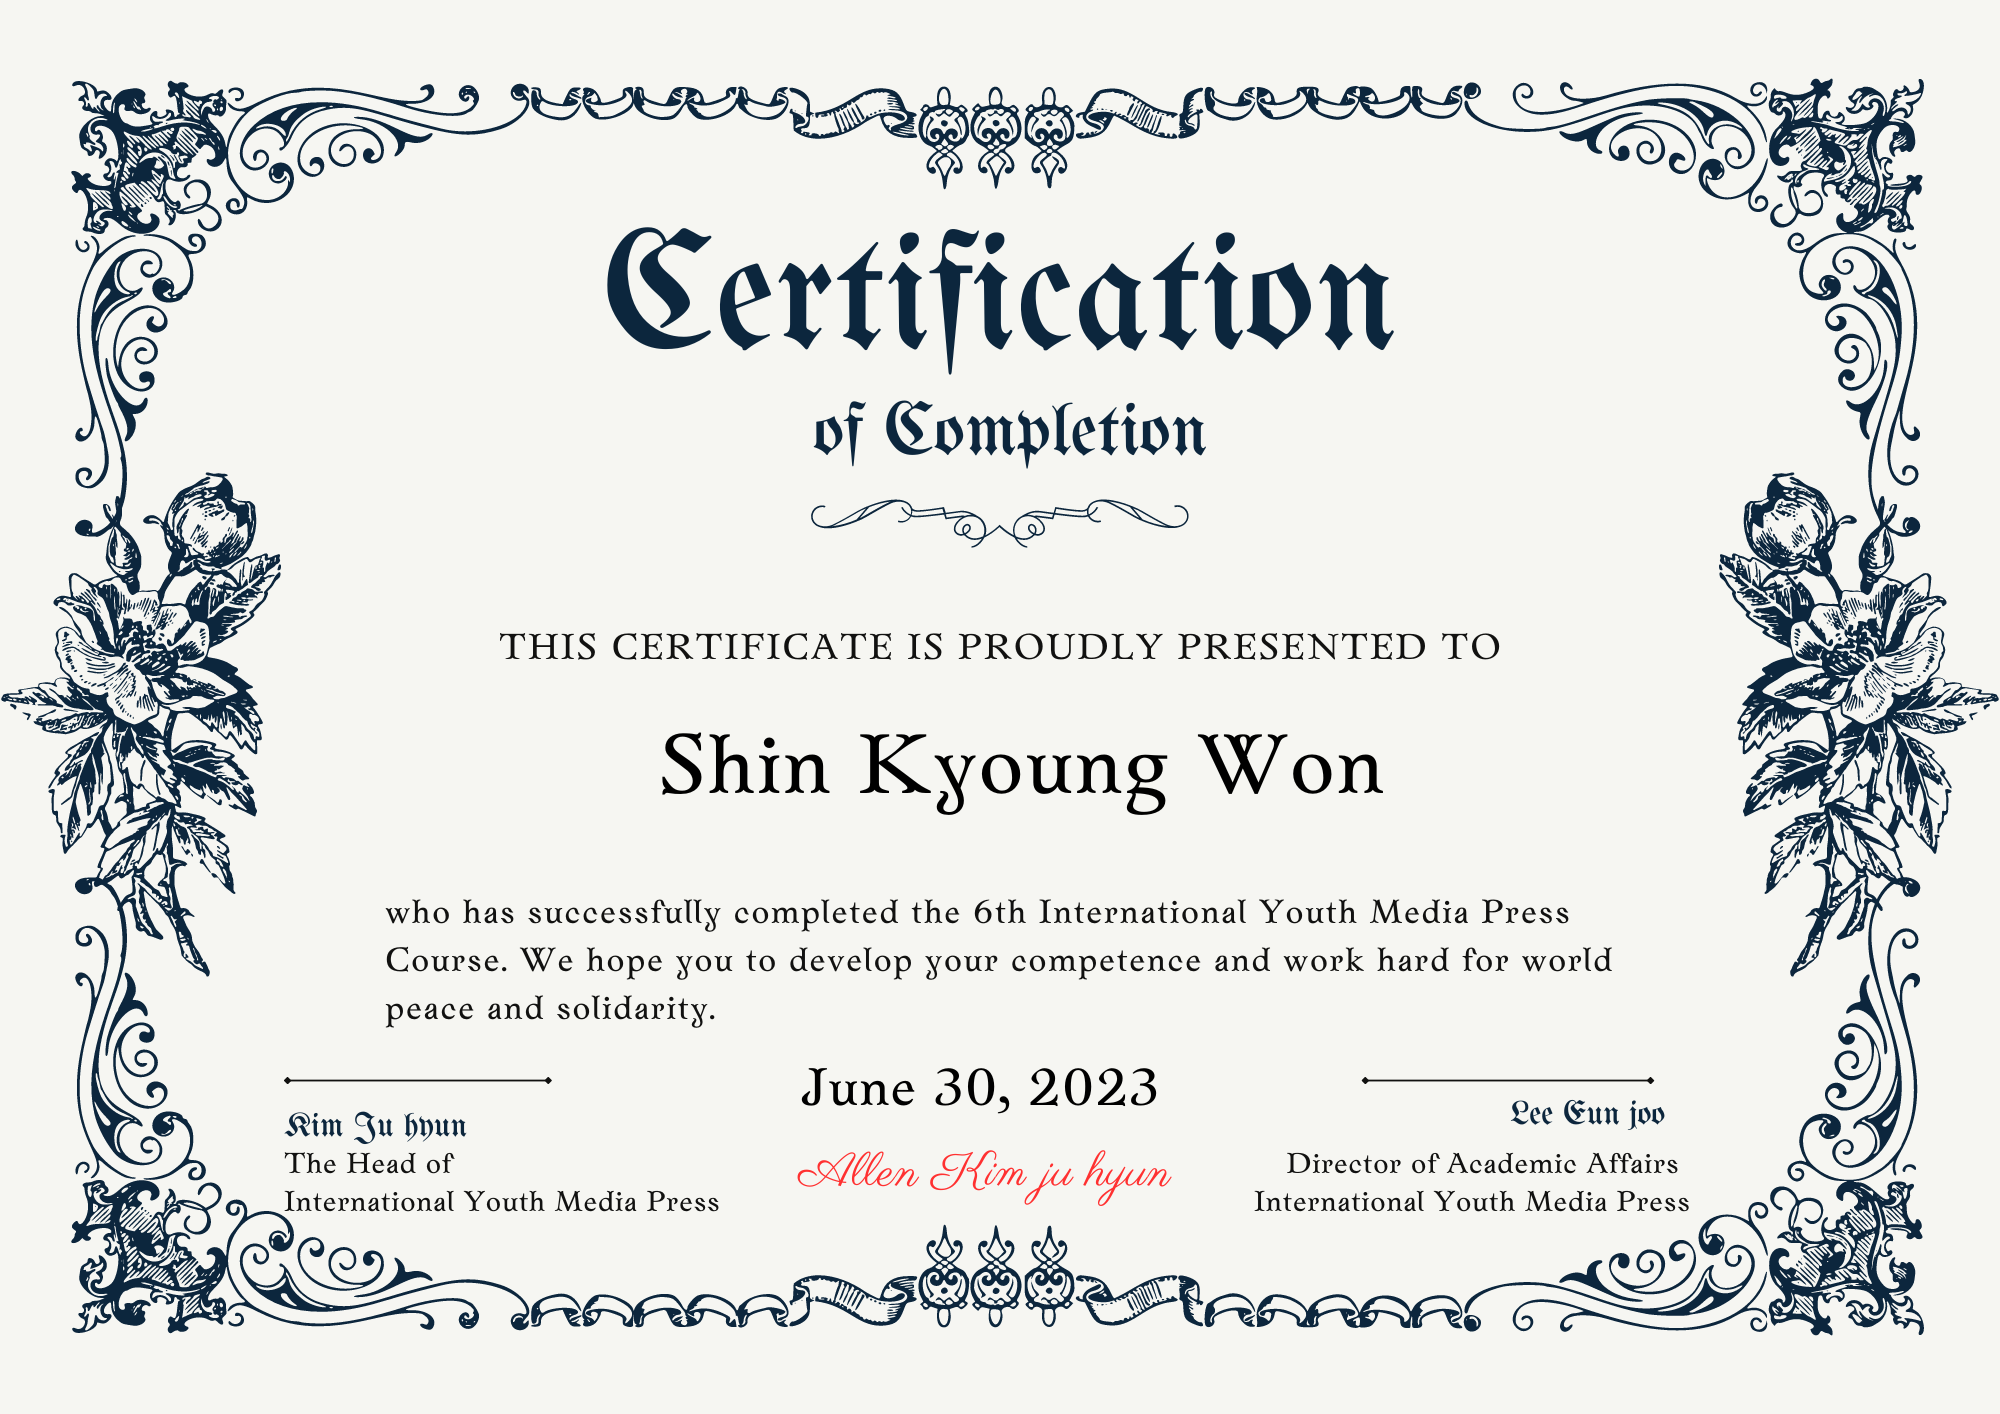 Modern Vintage Certificate of Achievement (4).png